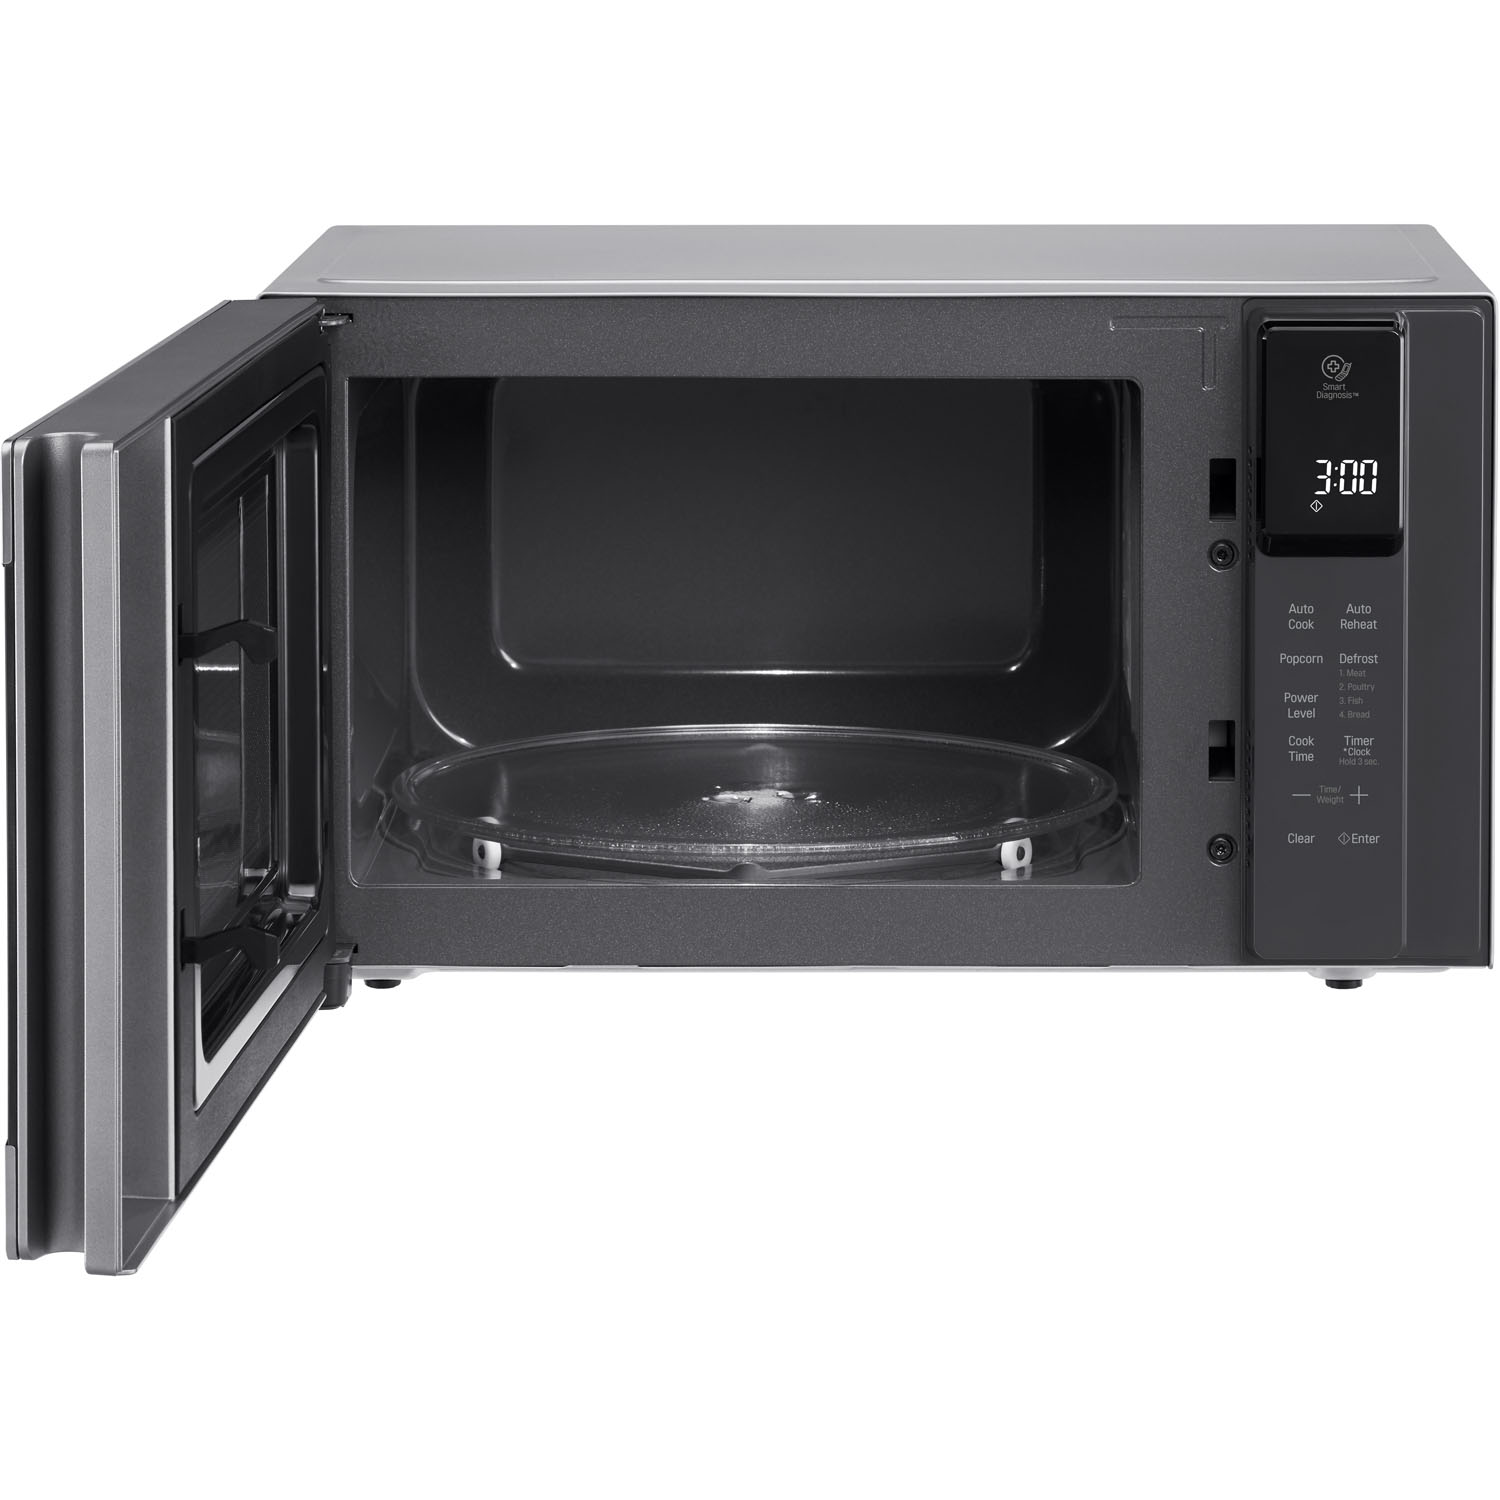 LG Neo Chef 0.9 Cu. Ft. 1000W Countertop Microwave - image 5 of 8